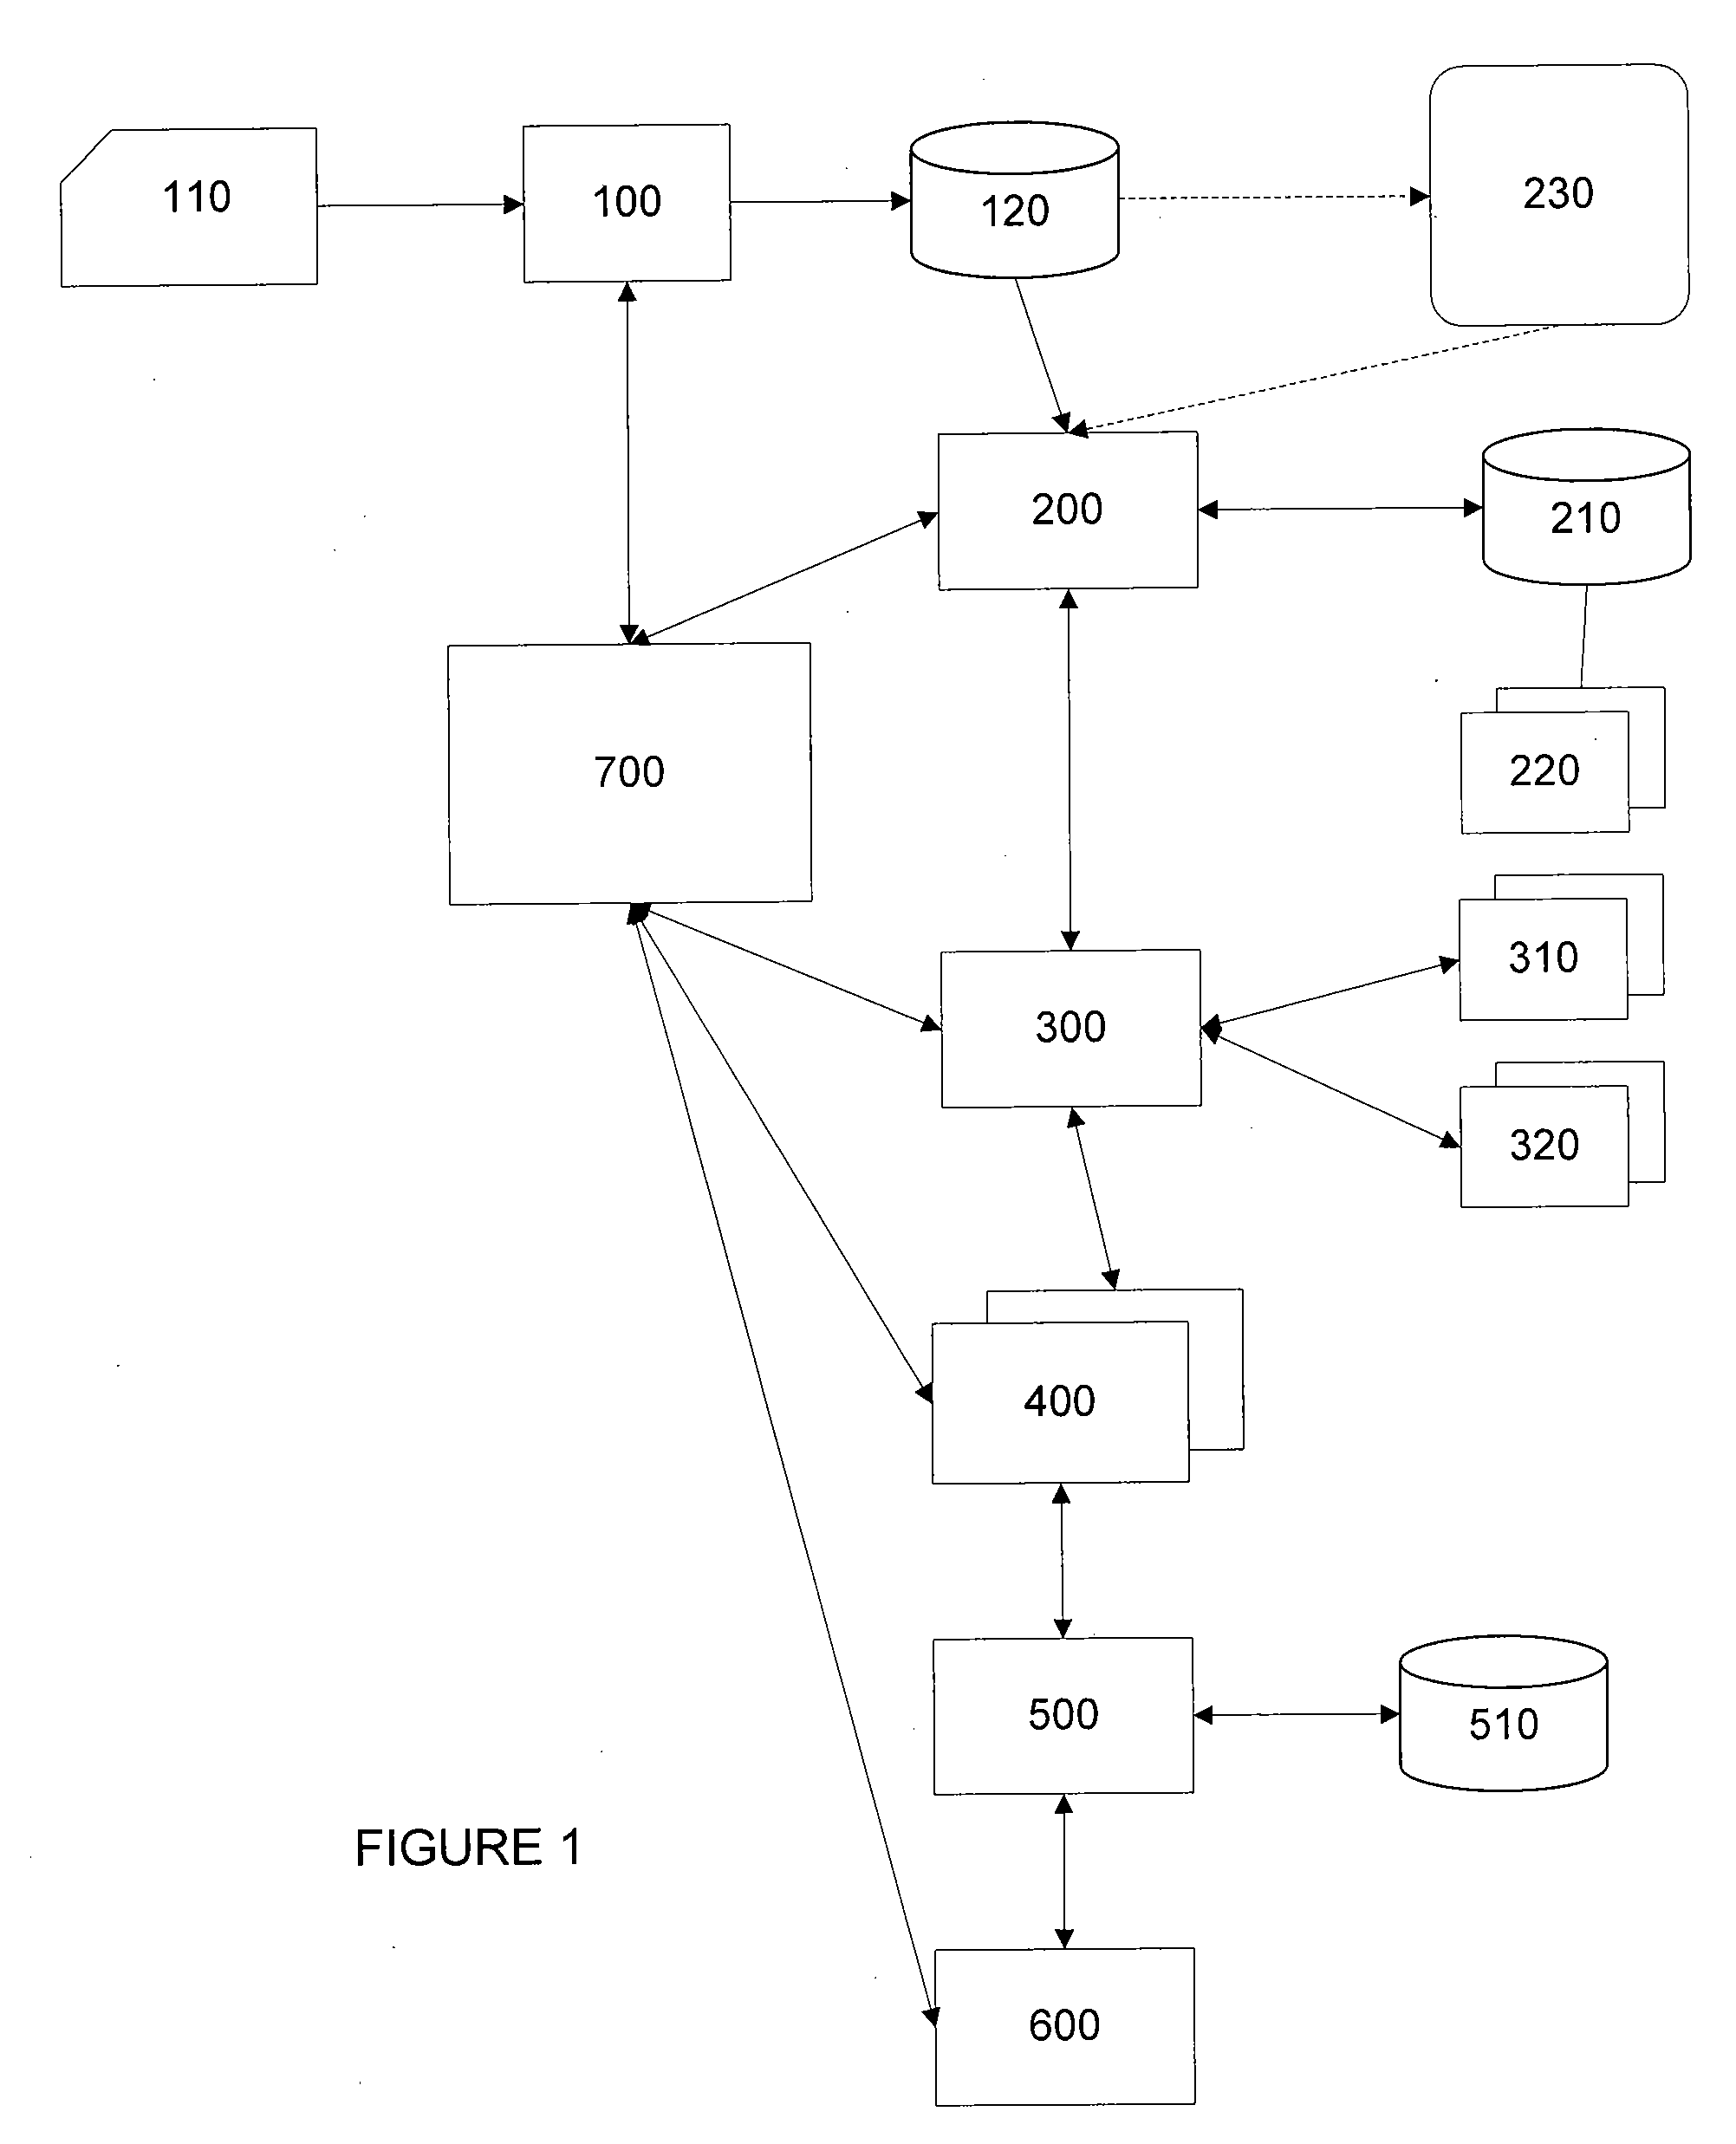 System and Method for Third Party Payment Processing of Credit Cards